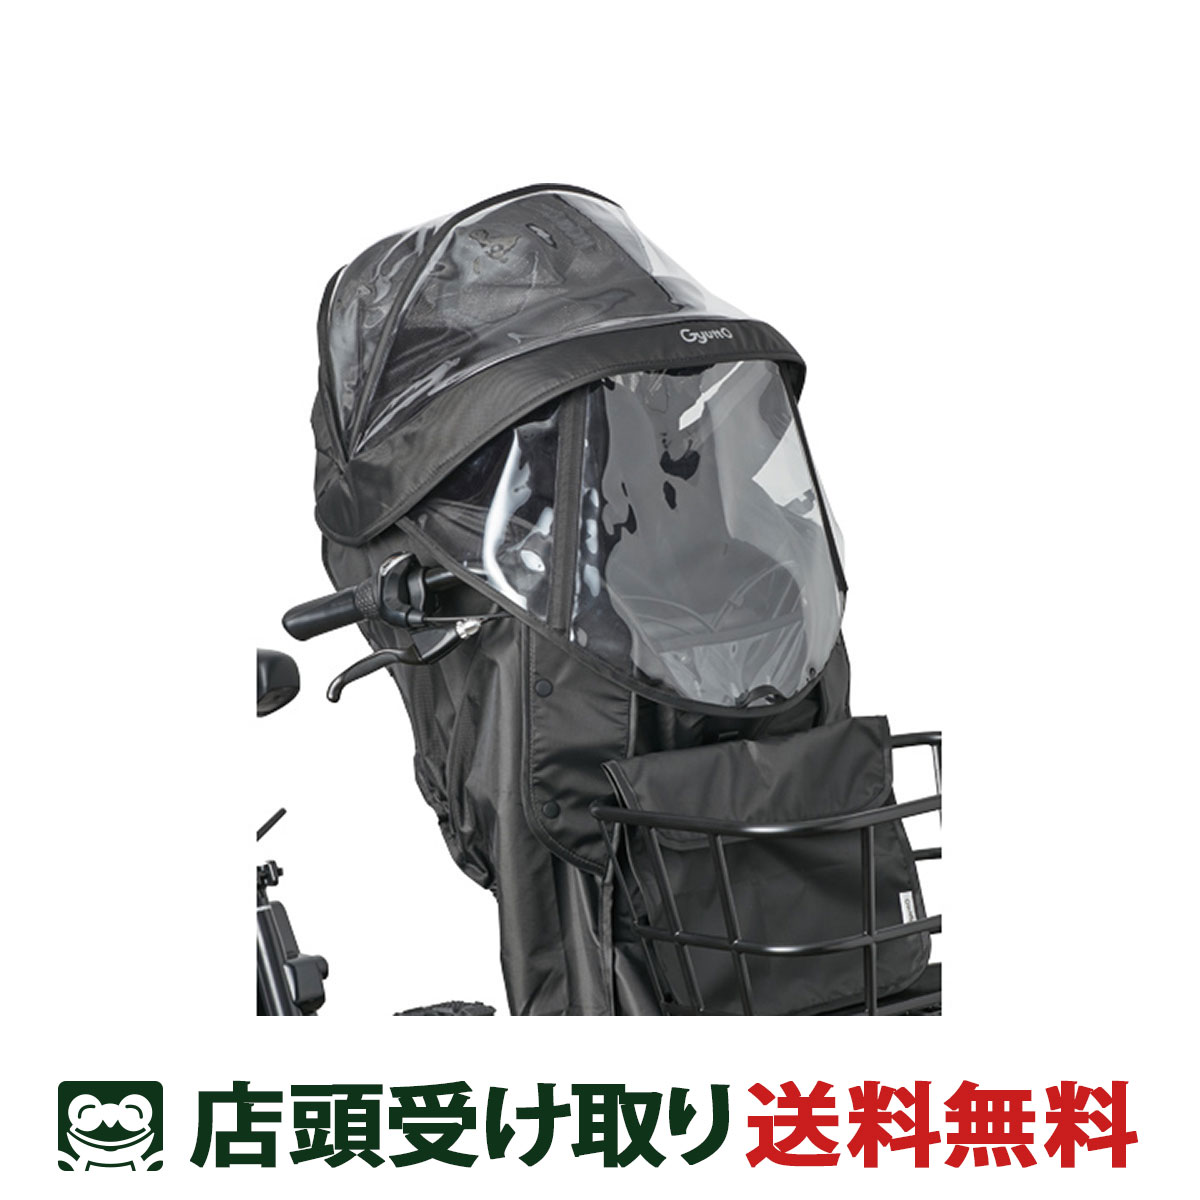  our shop limitation P10 times 5/29 Panasonic Panasonic 2WAY rain cover (Combi front for ) combination front for bicycle child seat cover black [NAR193]